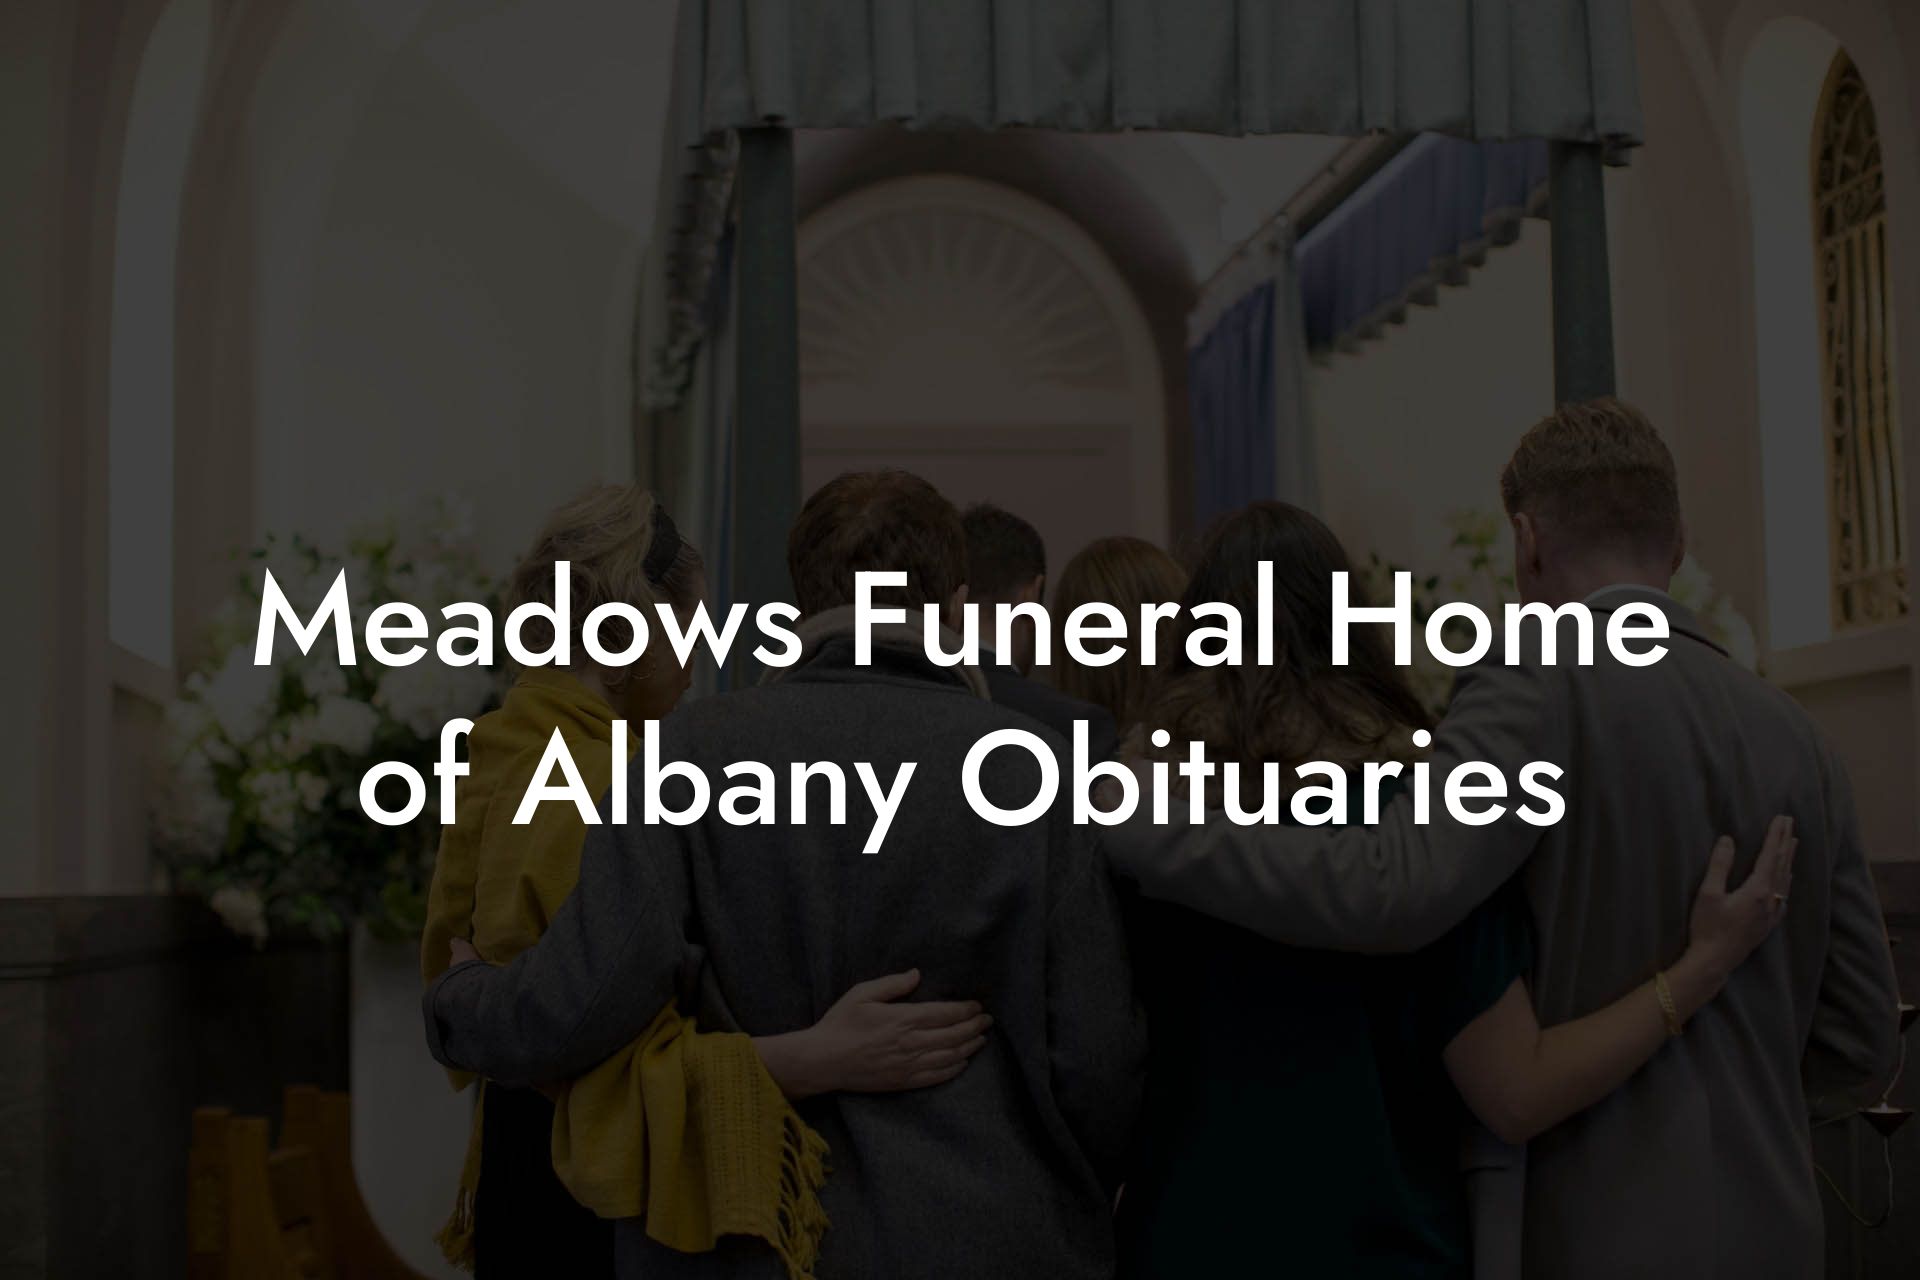 Meadows Funeral Home of Albany Obituaries